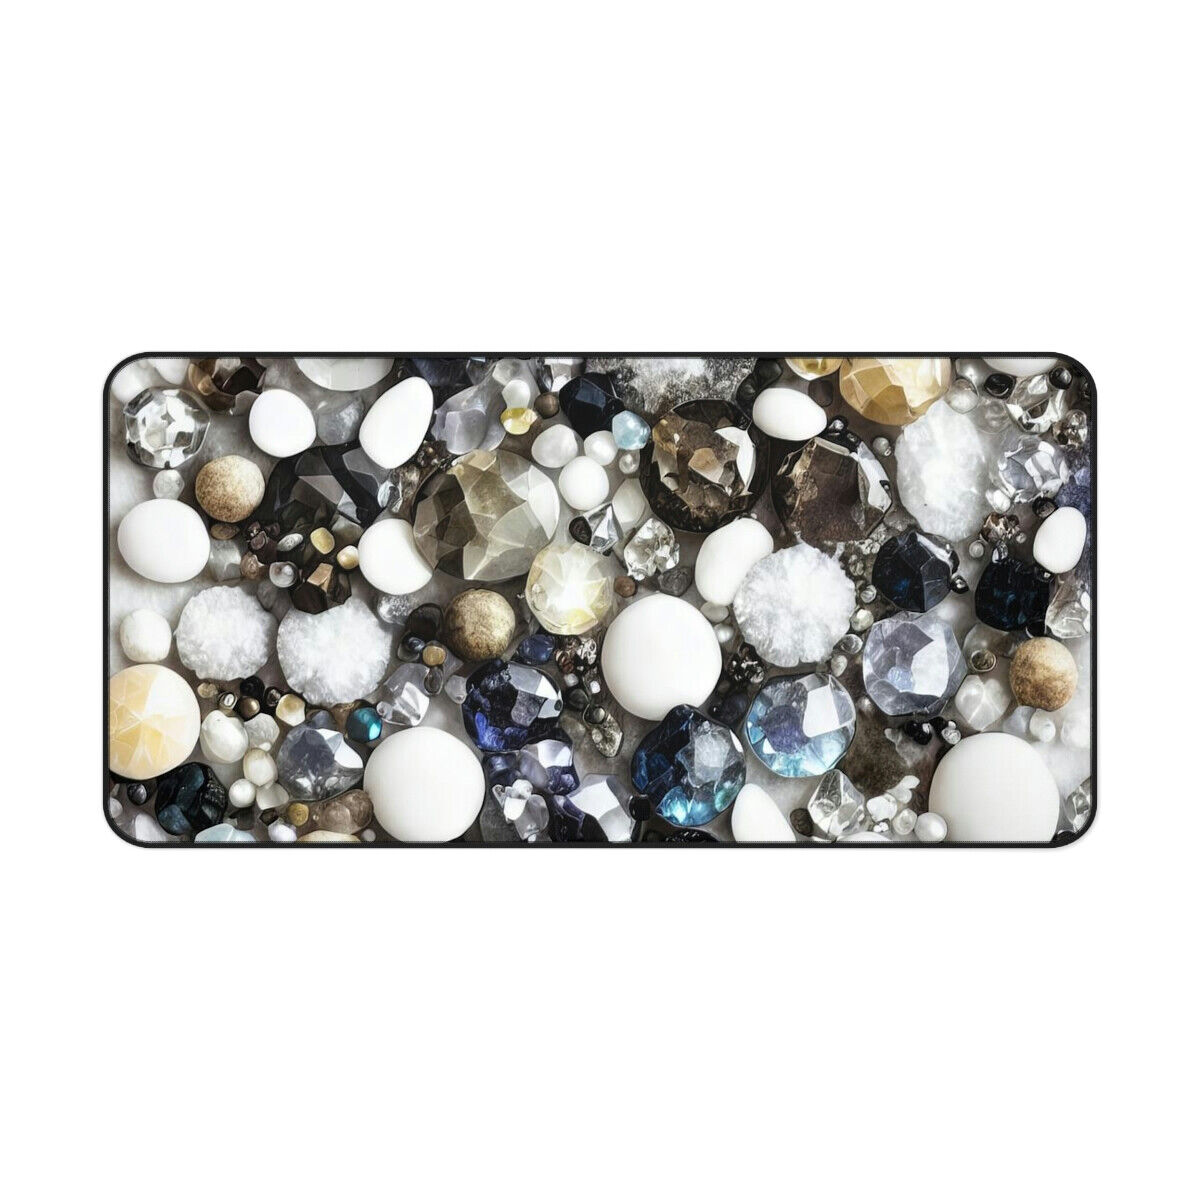  Eclectic Crystal Desk Mat Design to Add Personality to your space | Charming